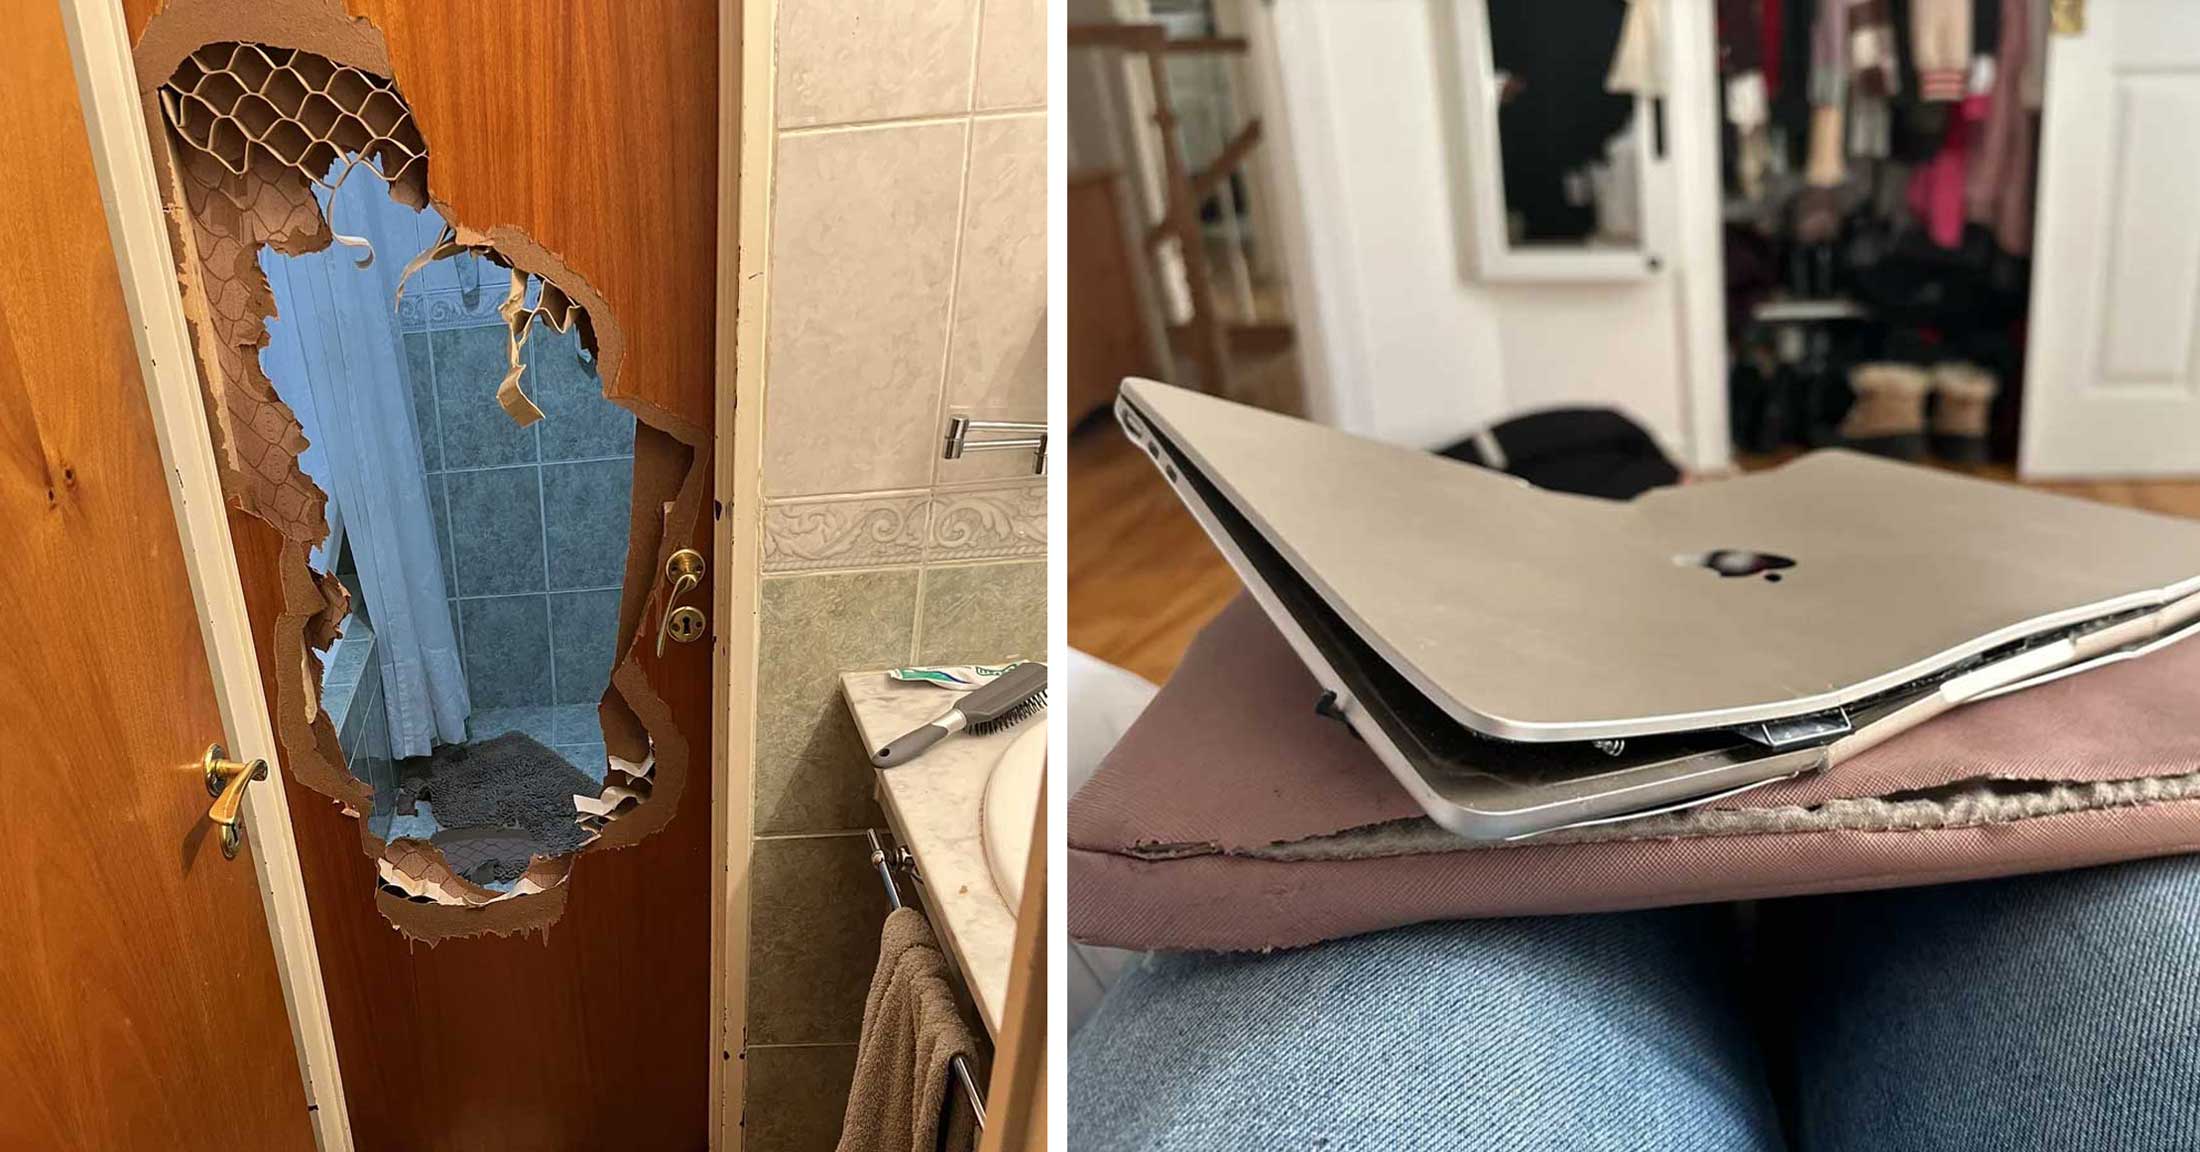 A bathroom door that someone had to break down and a busted MacBook Air